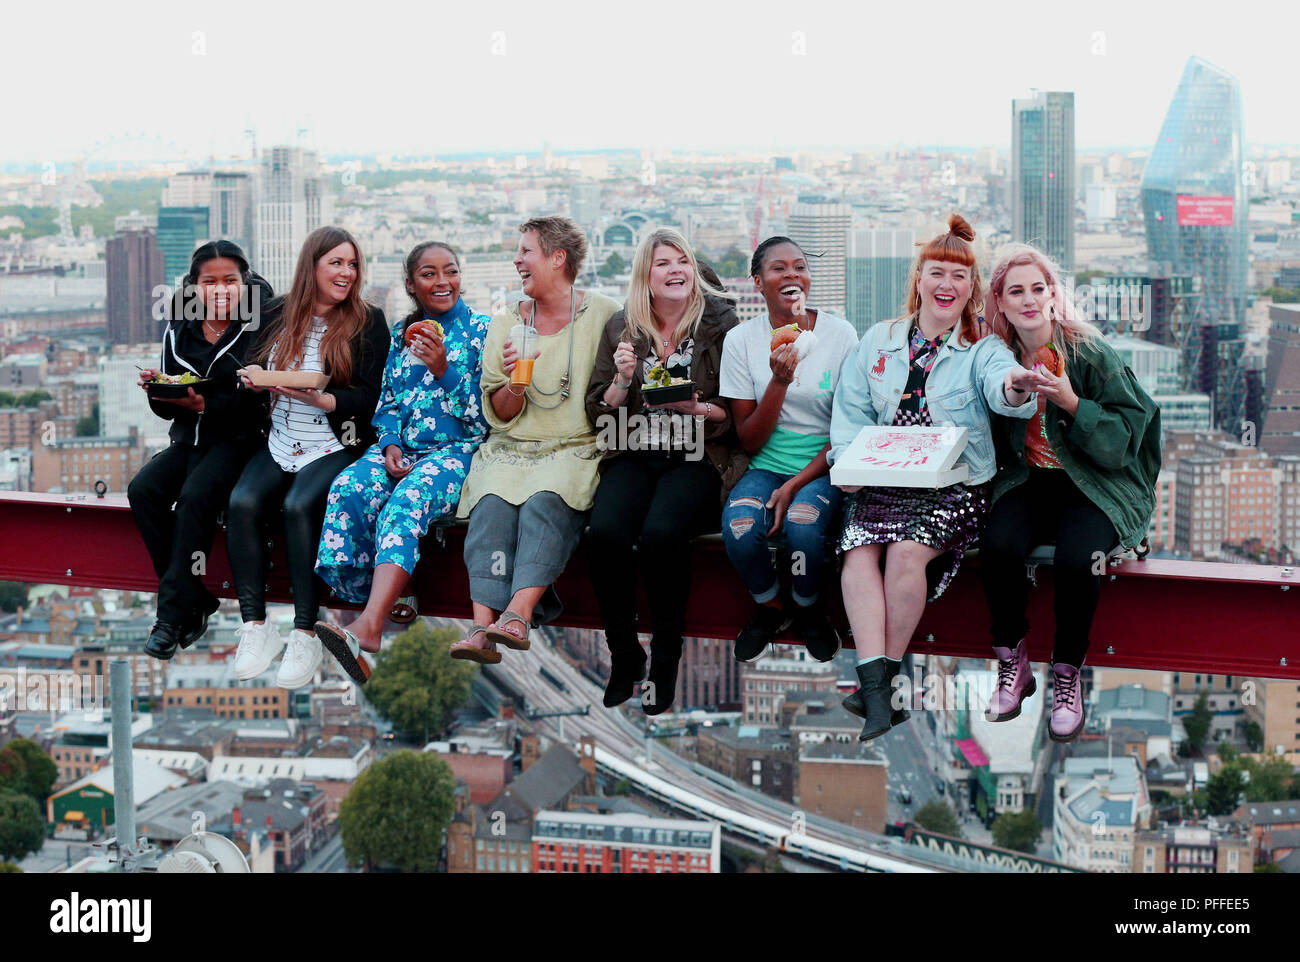 Lunch Atop A Skyscraper High Resolution Stock Photography and Images - Alamy